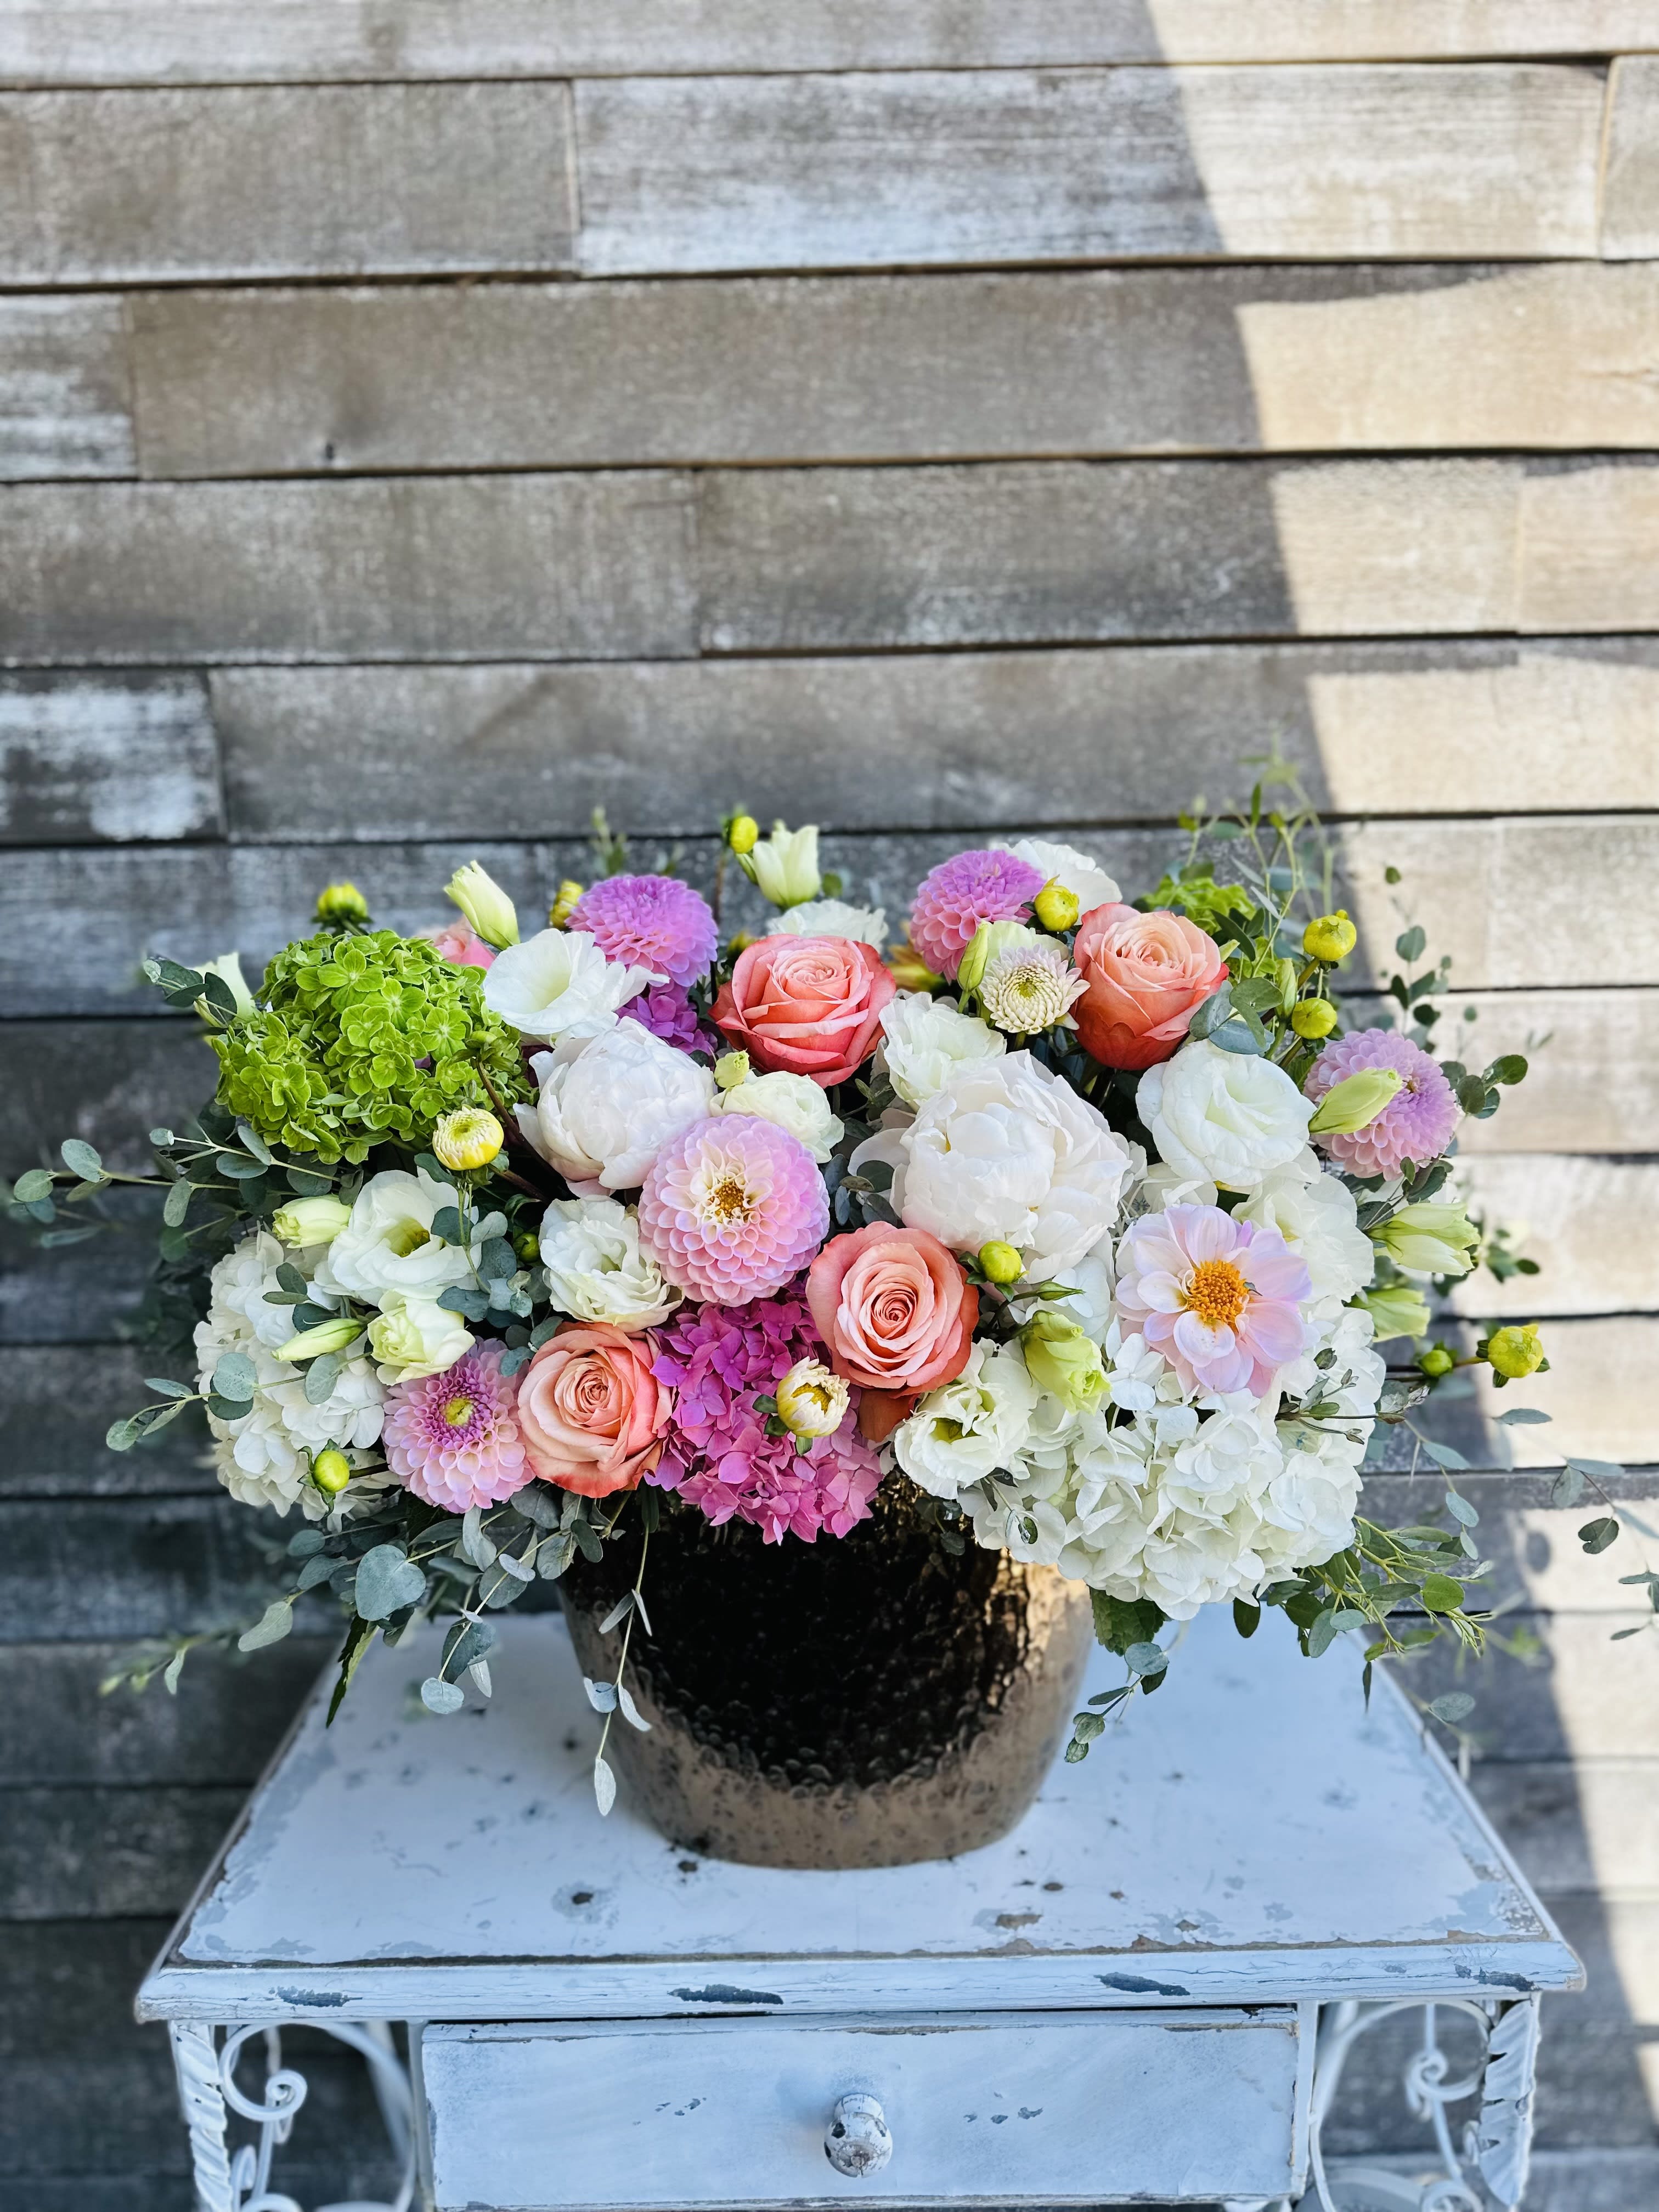 Summer brilliance - Bronzed vessel with a gorgeous combination designed to the eye with fresh with dahlias roses and hydrangeas